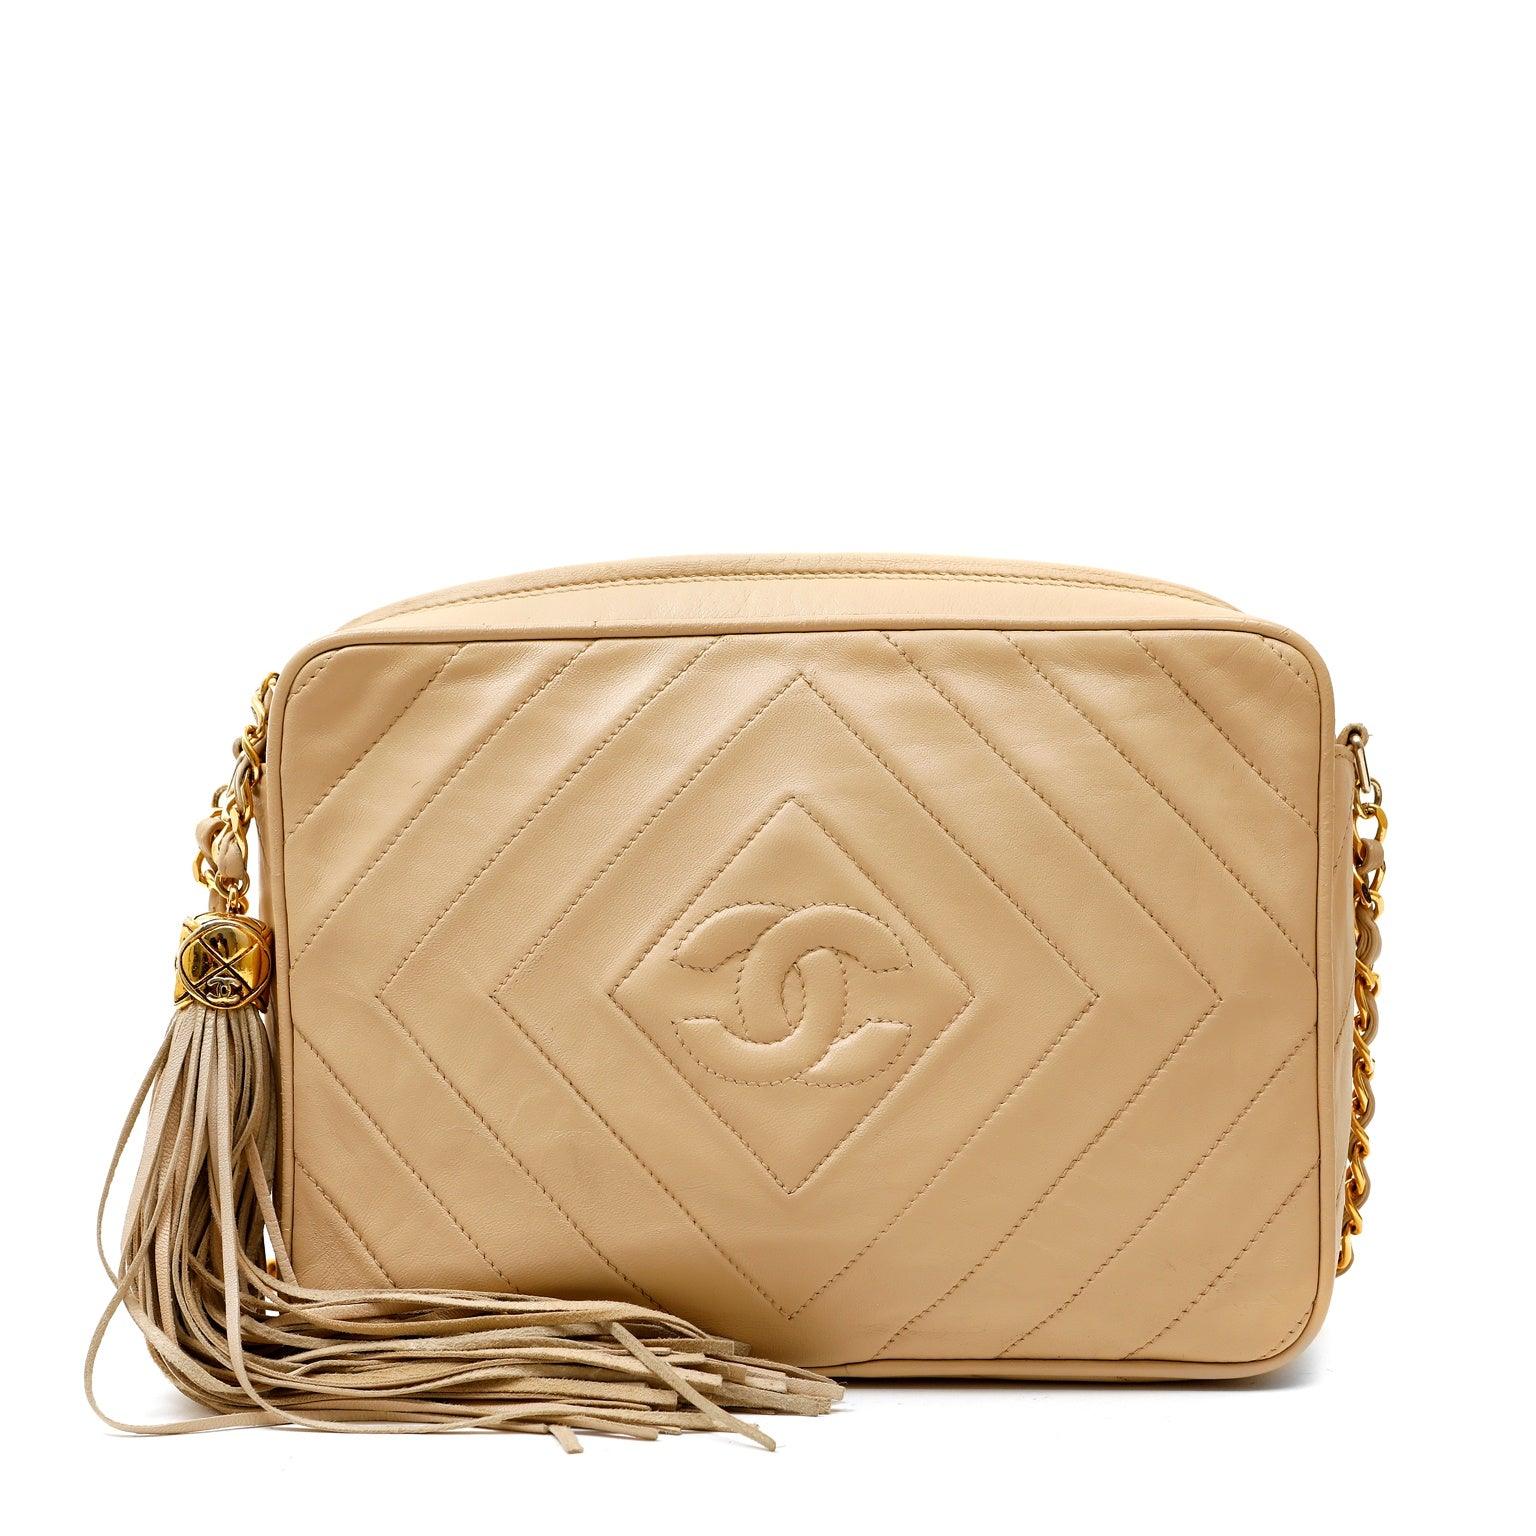 Chanel Beige Quilted Leather Vintage Camera Bag – Only Authentics